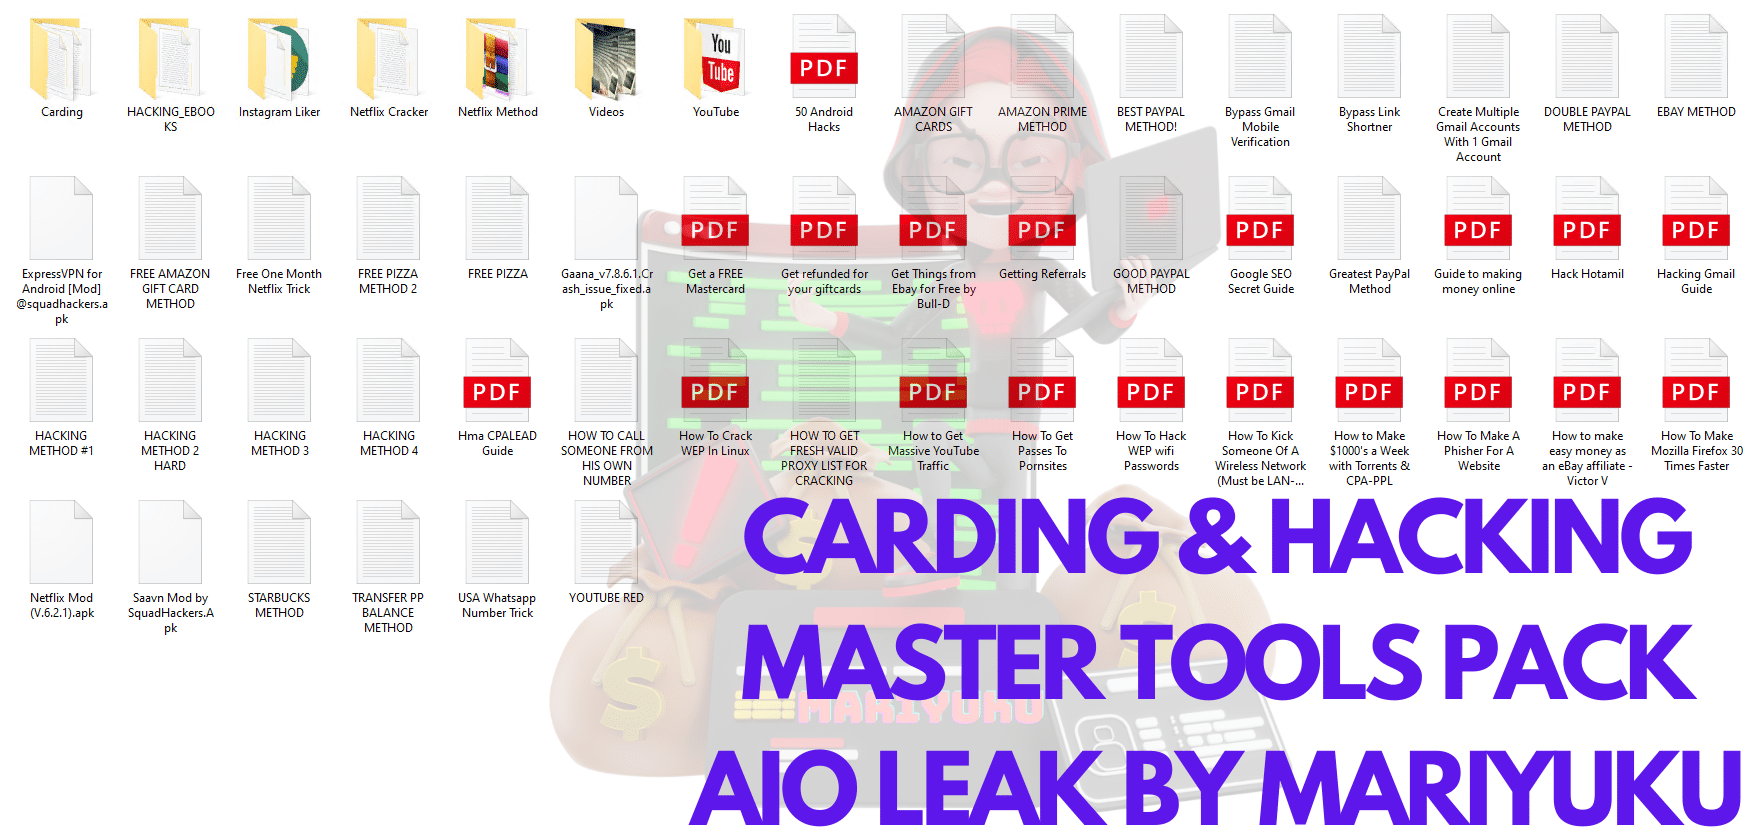 CARDING  HACKING MASTER TOOLS PACK AIO